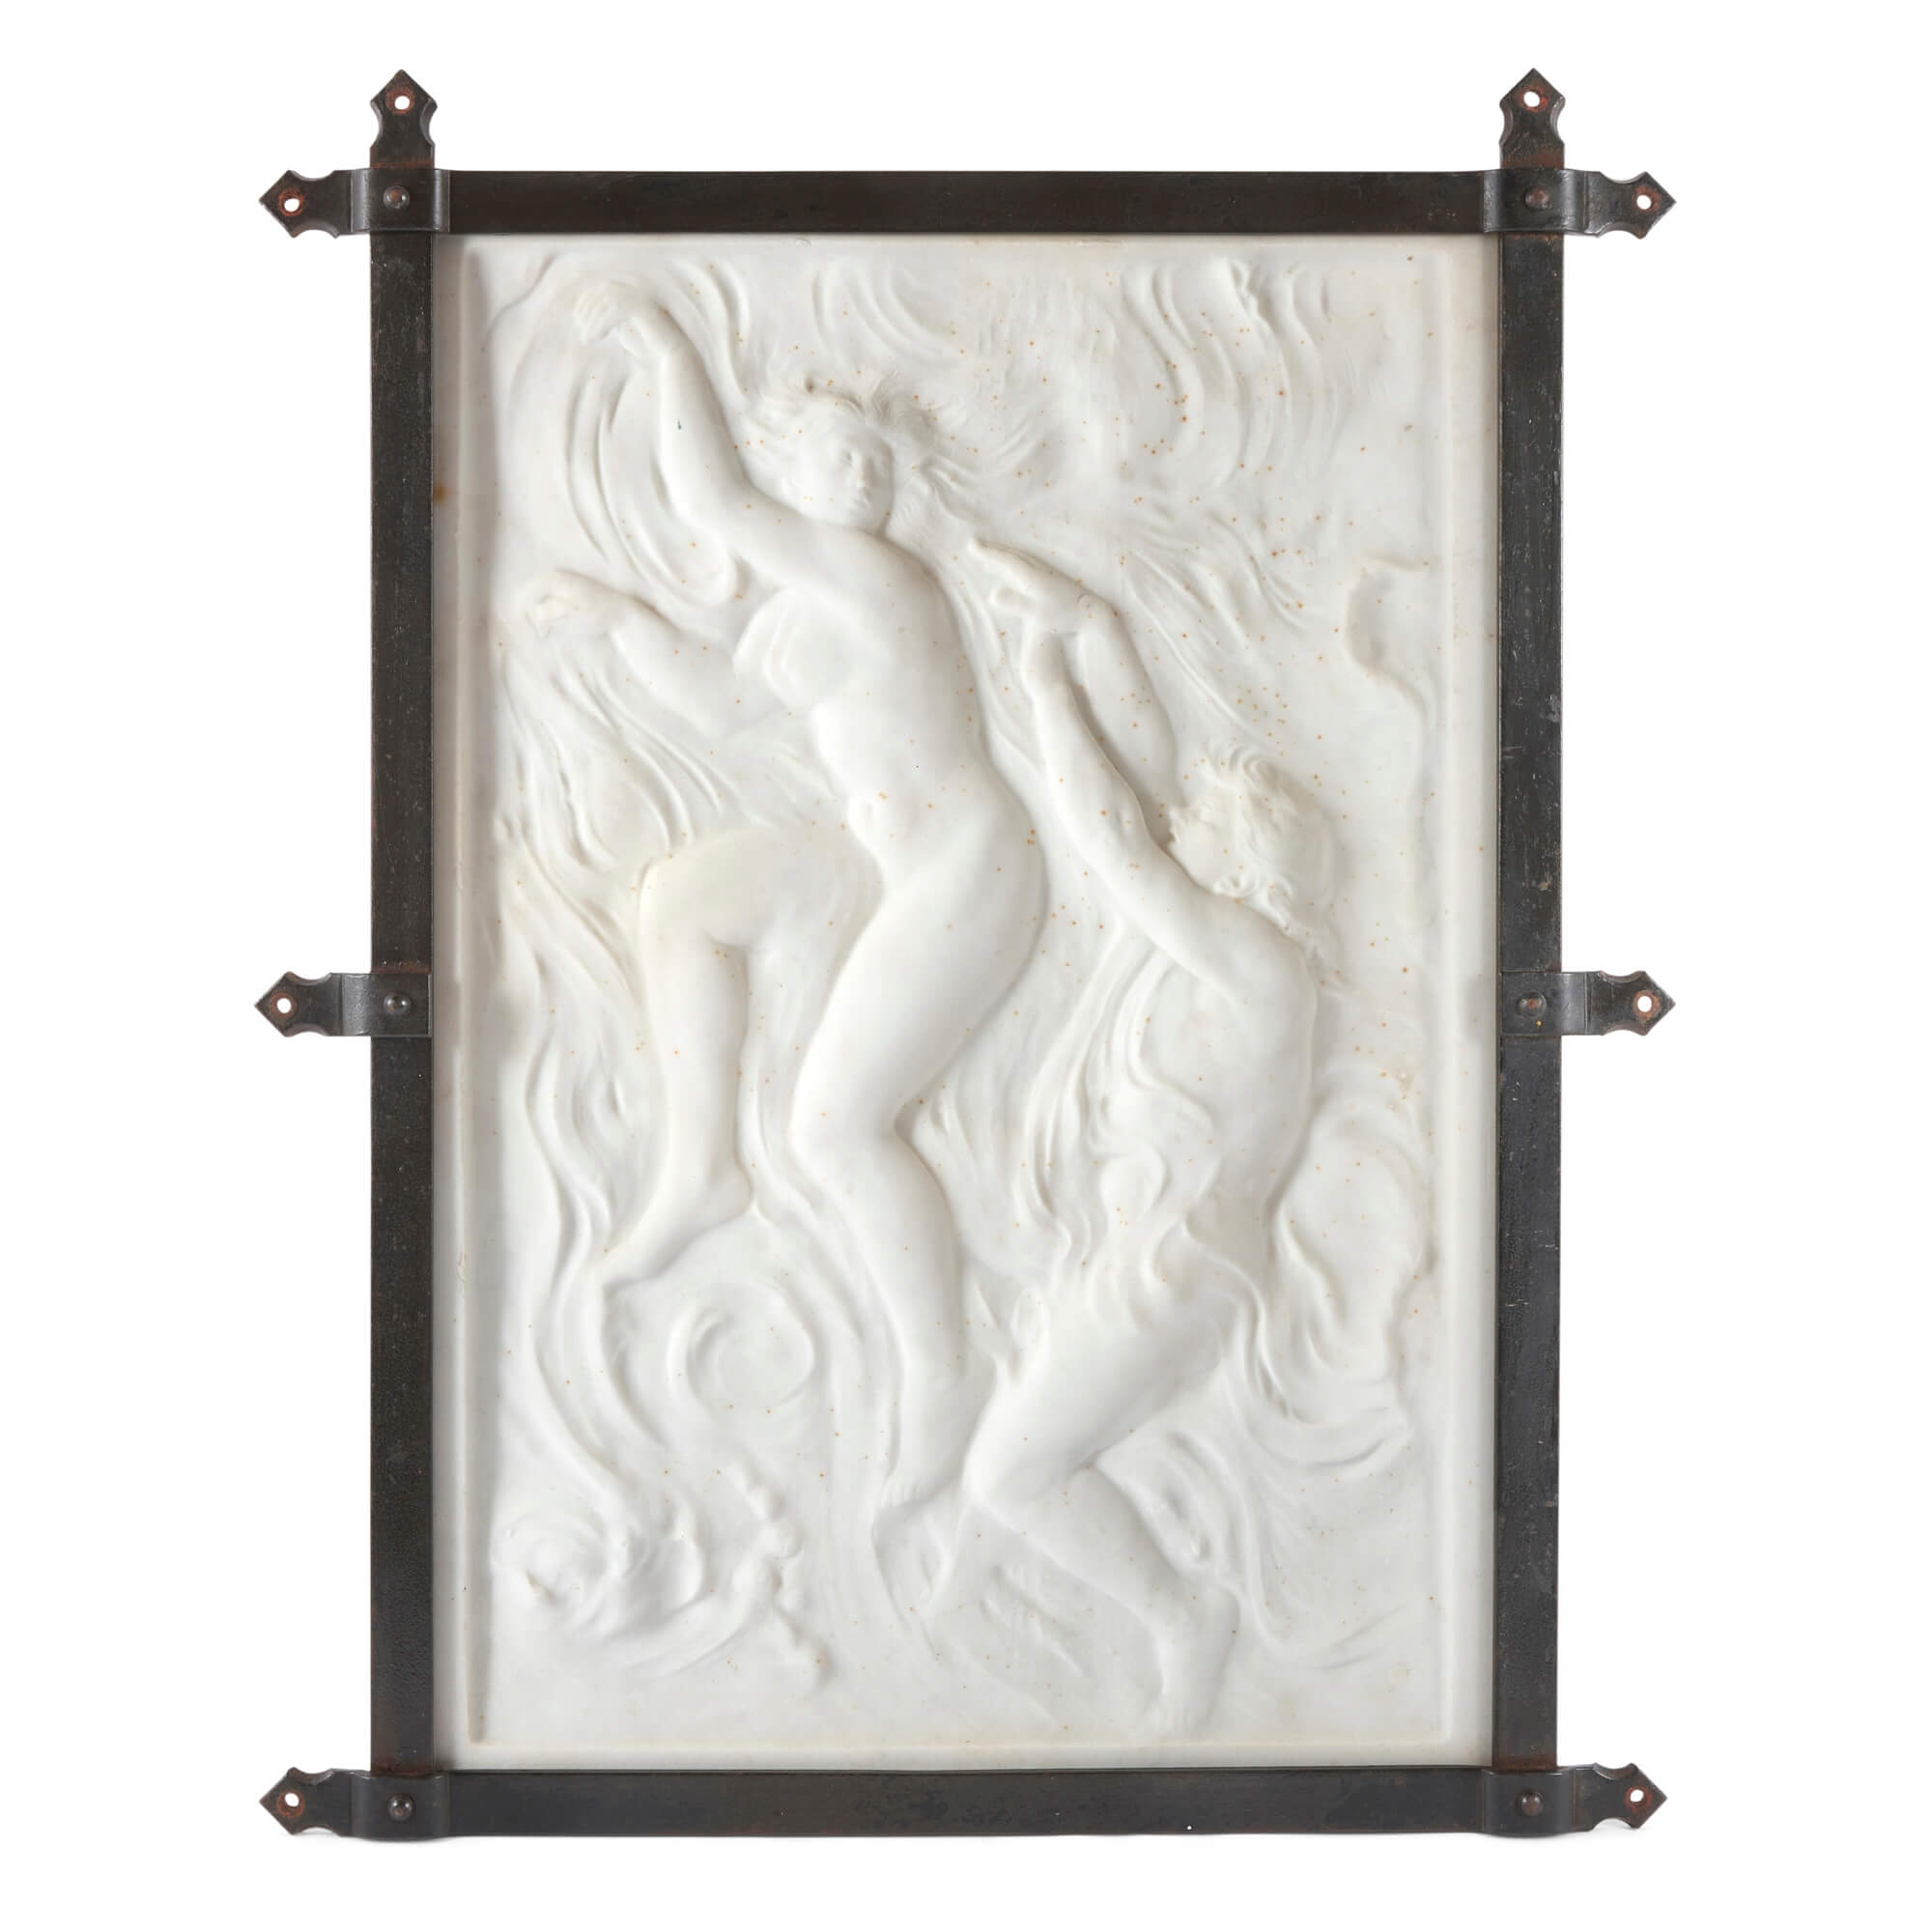 Large Marble Figurative Relief Panel by Pegram